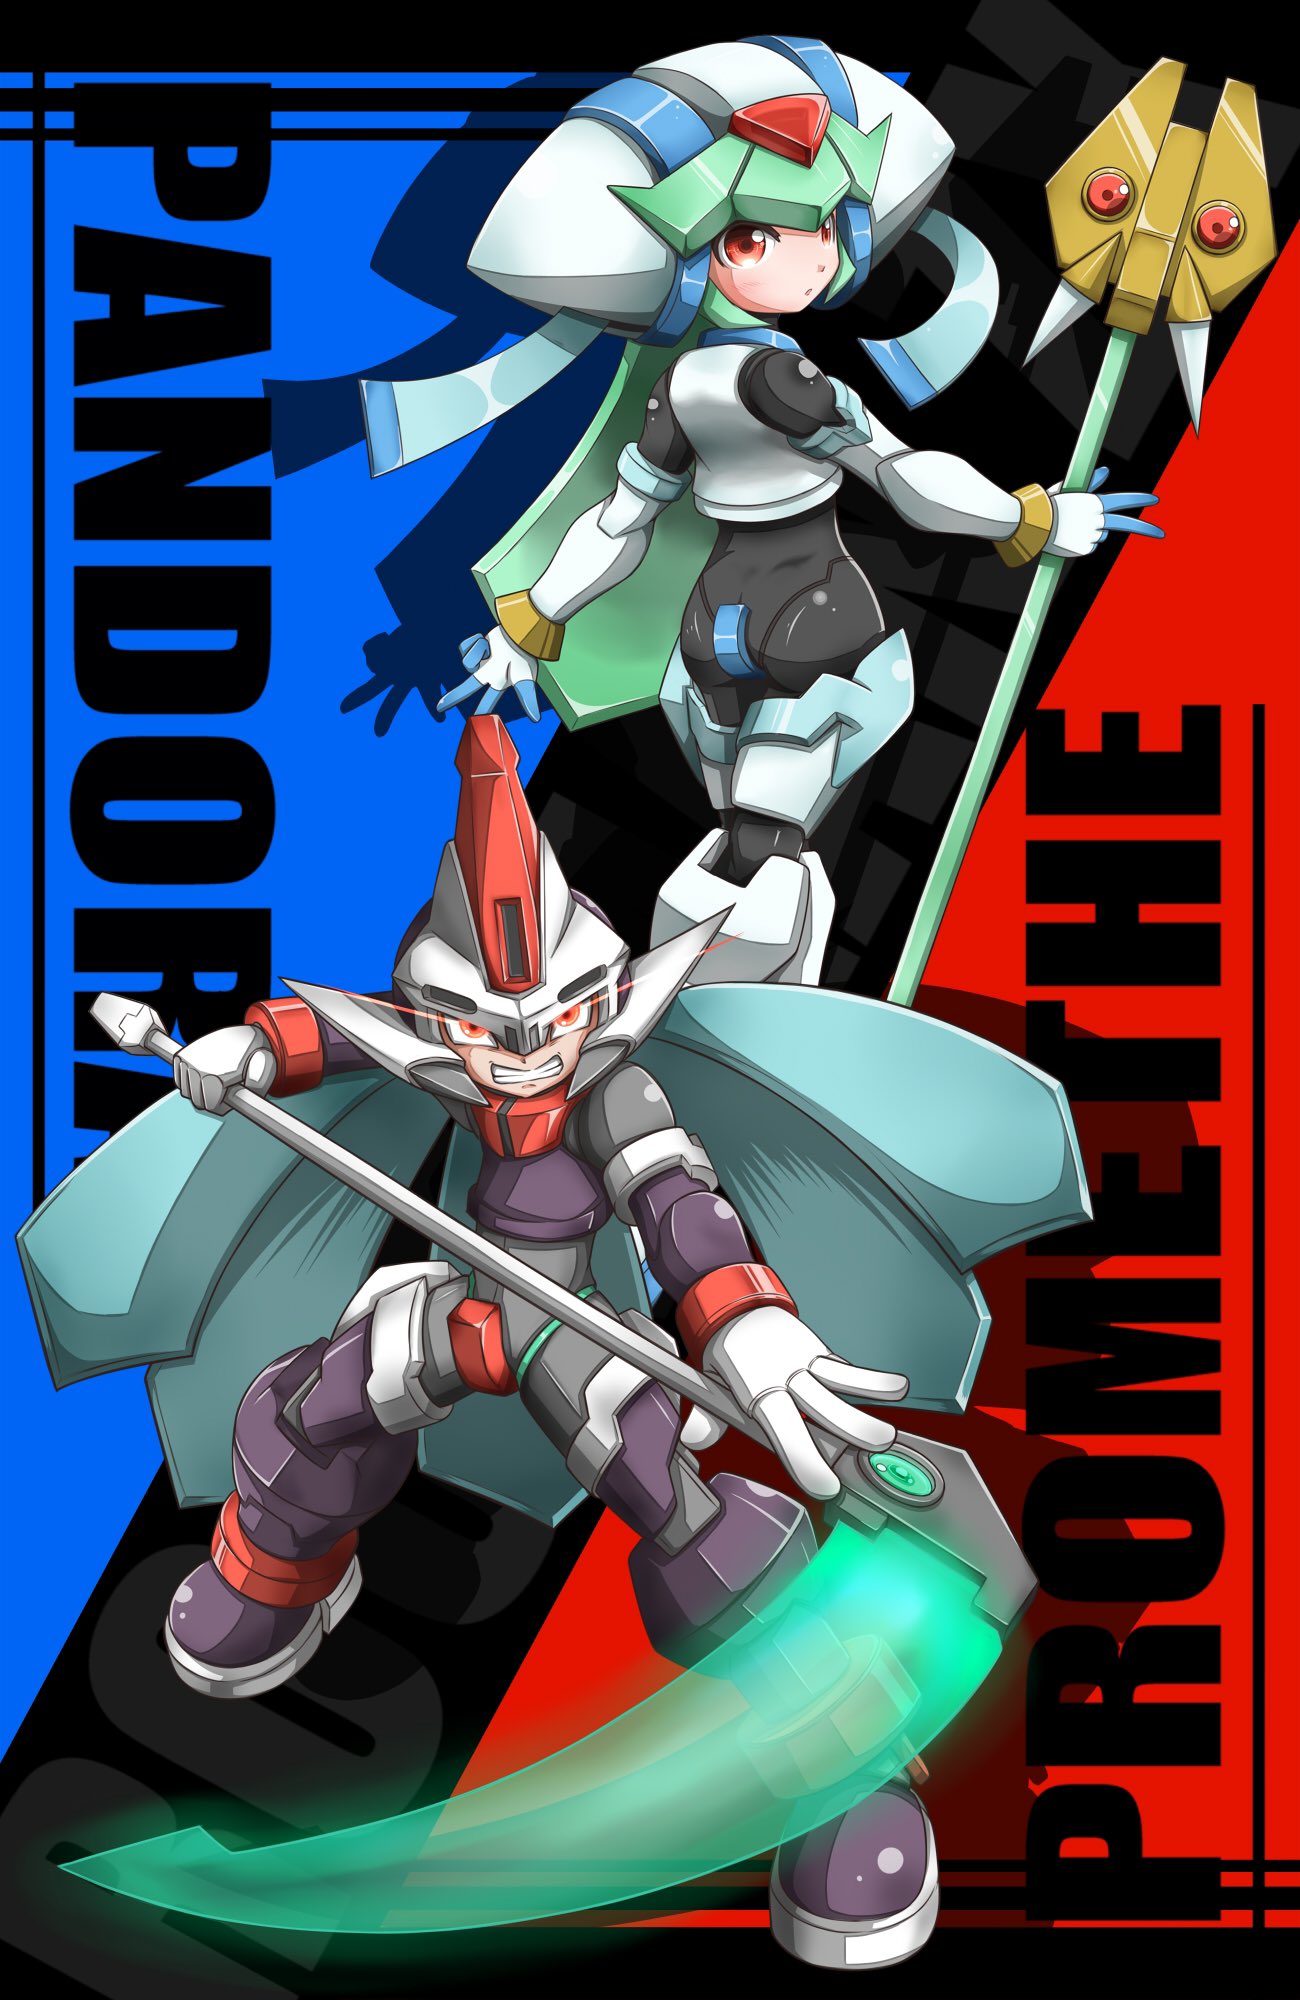 1boy 1girl armor black_bodysuit blue_hair bodysuit character_name clenched_teeth commentary_request copyright_name crop_top crotch_plate energy_blade fins from_behind glowing glowing_eyes green_hair head_fins highres holding holding_scythe holding_staff long_hair looking_at_viewer mega_man_(series) mega_man_zx model_w_(mega_man) pandora_(mega_man) power_armor prometheus_(mega_man) purple_armor red_eyes red_helmet scythe skull-shaped_hat staff takaramono teeth white_armor white_helmet